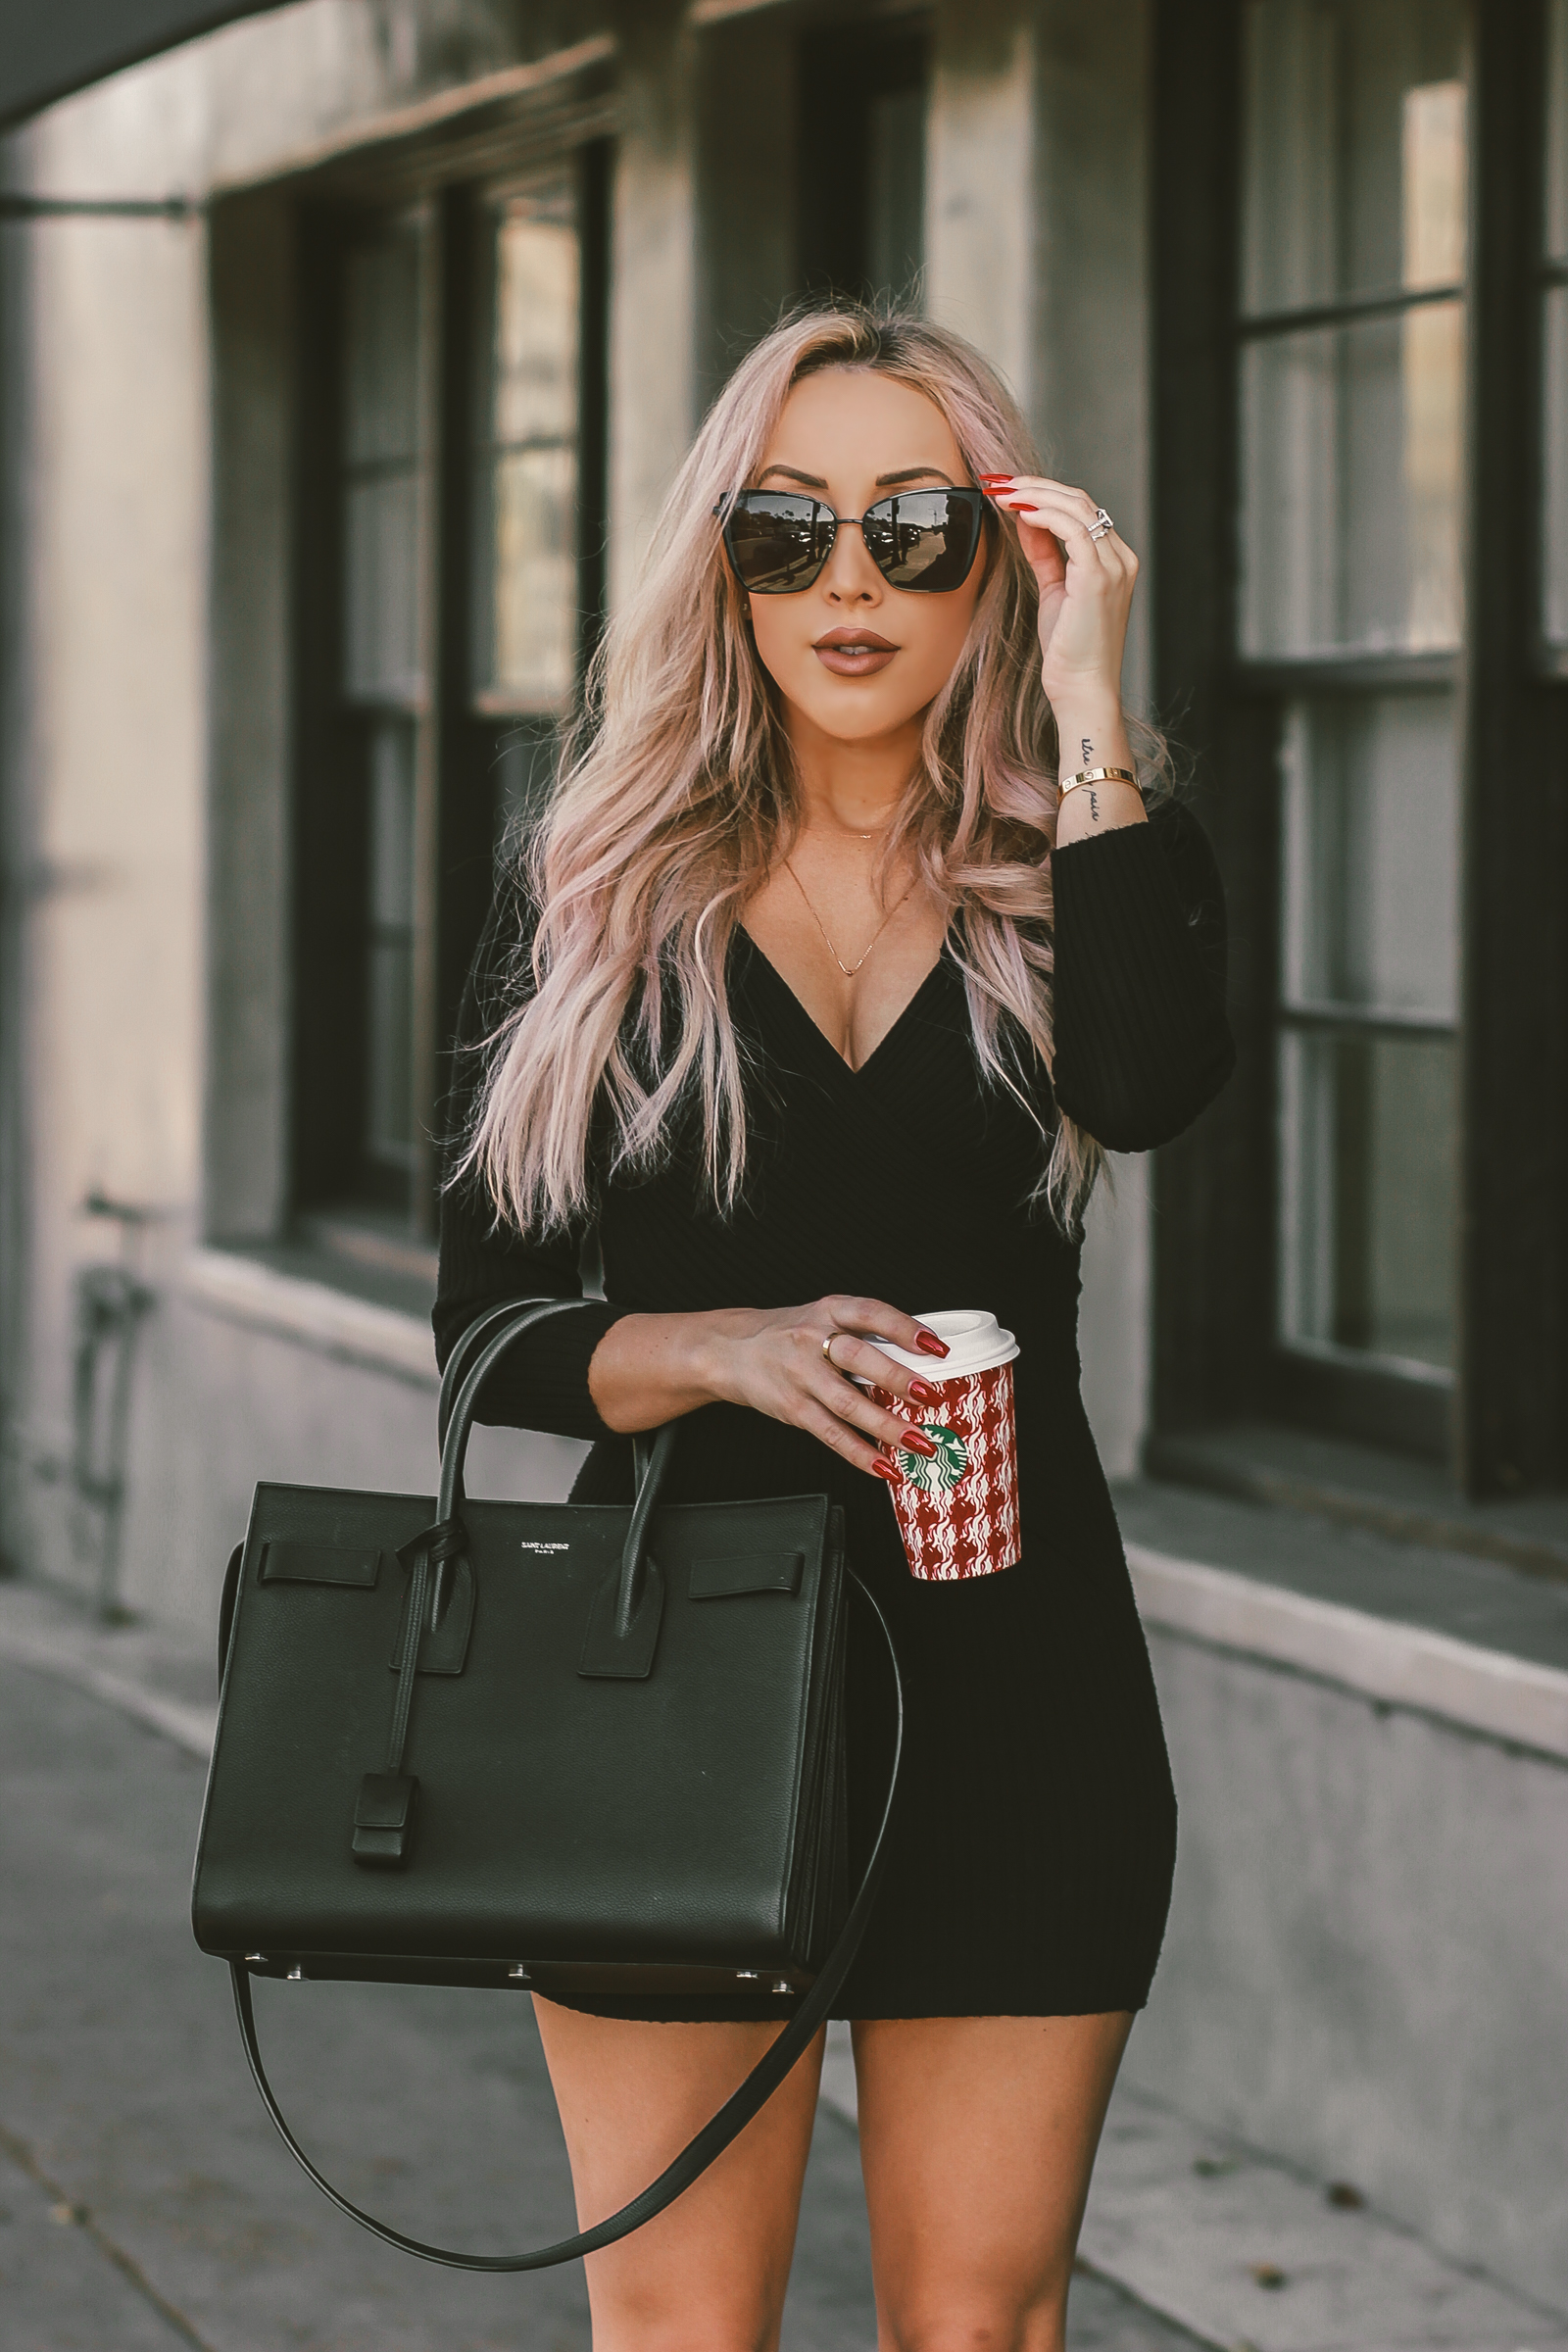 Black Sweater Dress for the Holiday's | Black Saint Laurent | Fall Fashion | Winter Fashion in LA | Saint Laurent Sac De Jour | Louboutins | Blondie in the City by Hayley Larue